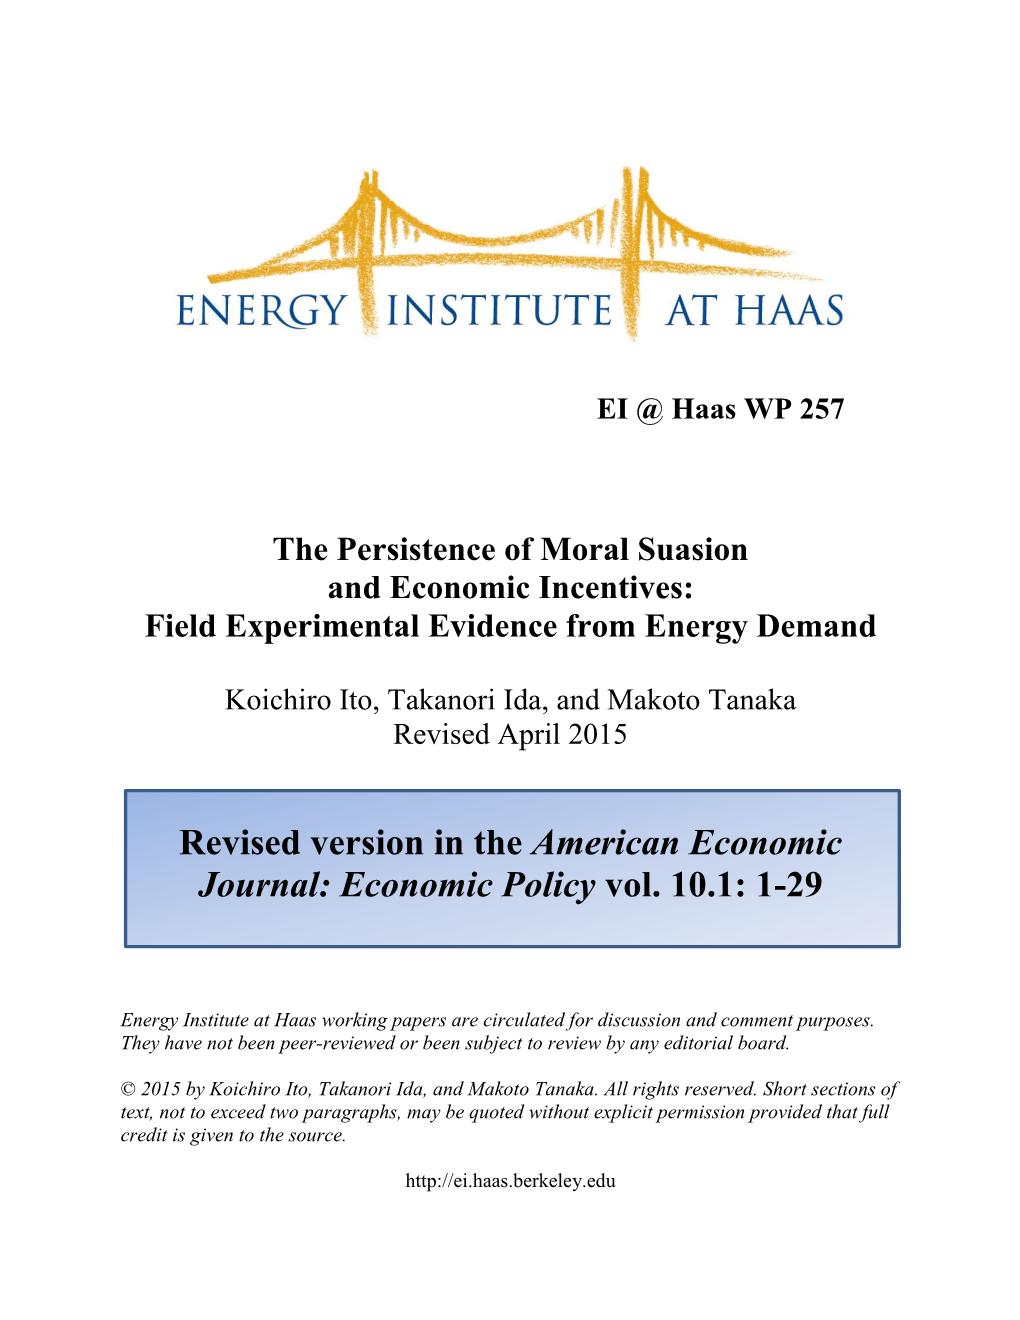 The Persistence of Moral Suasion and Economic Incentives: Field Experimental Evidence from Energy Demand